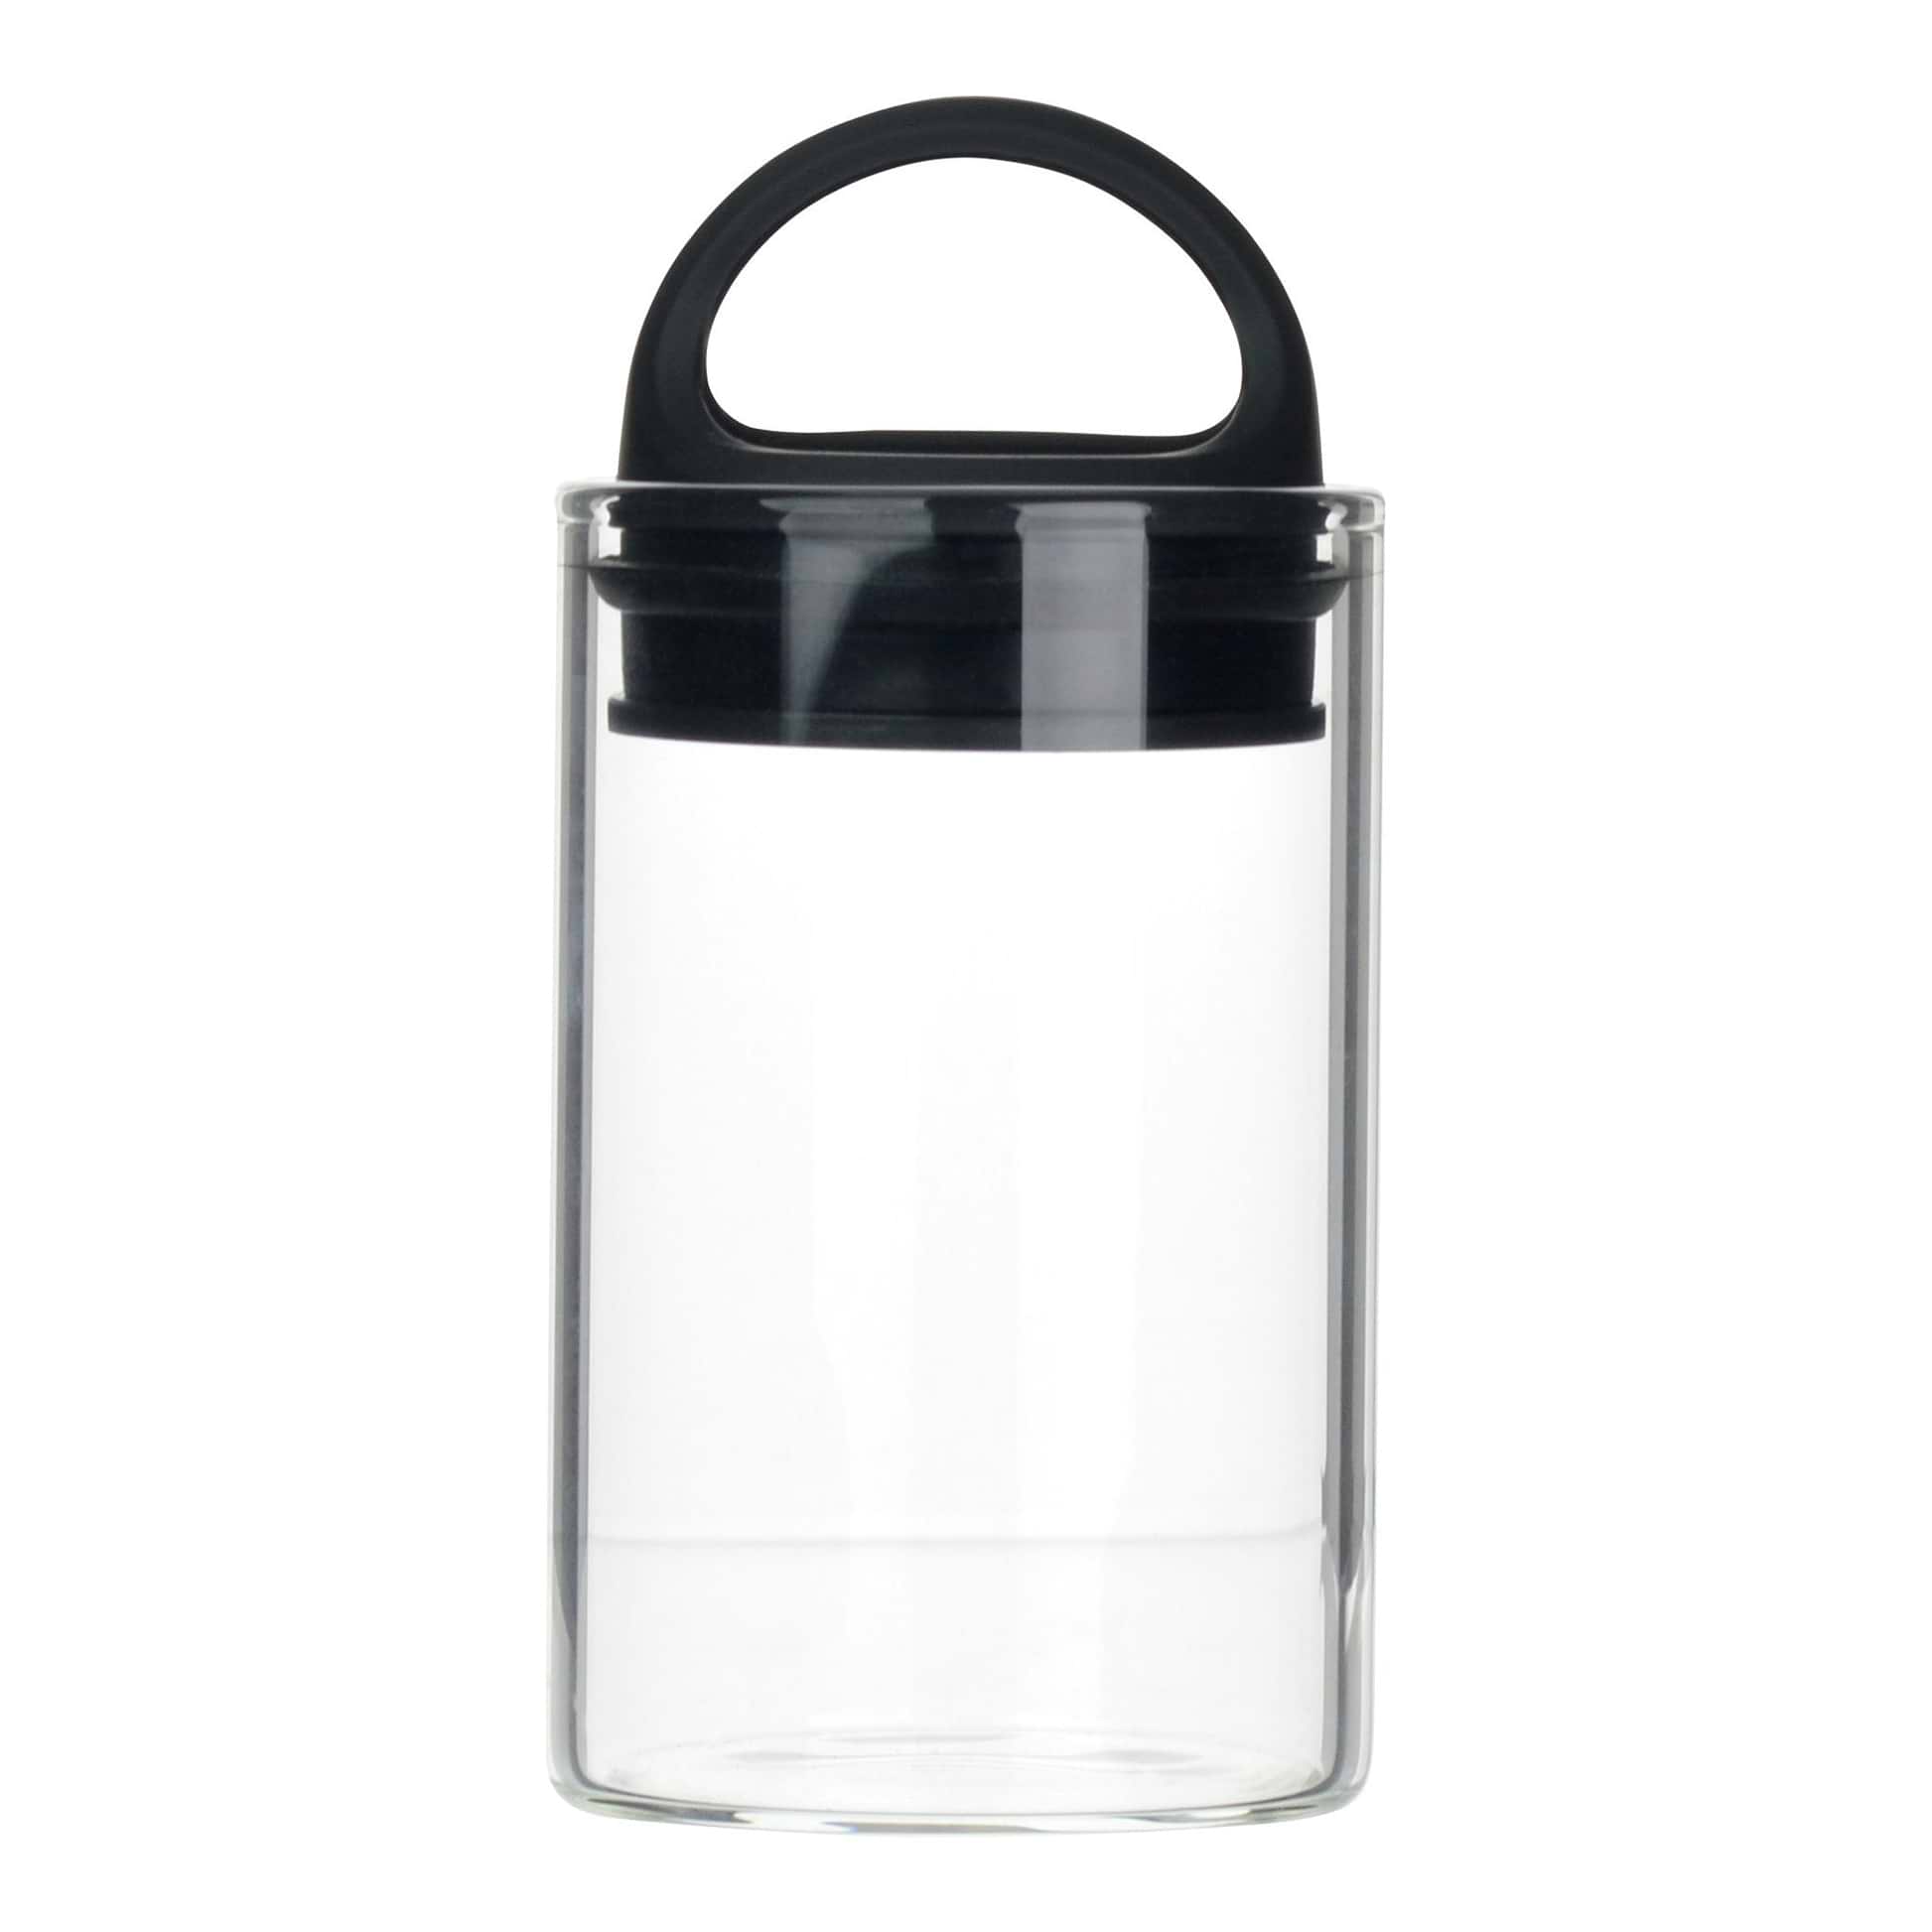 Black clear glass stash jar storage container vacuum seal easy-to-carry with curved handle